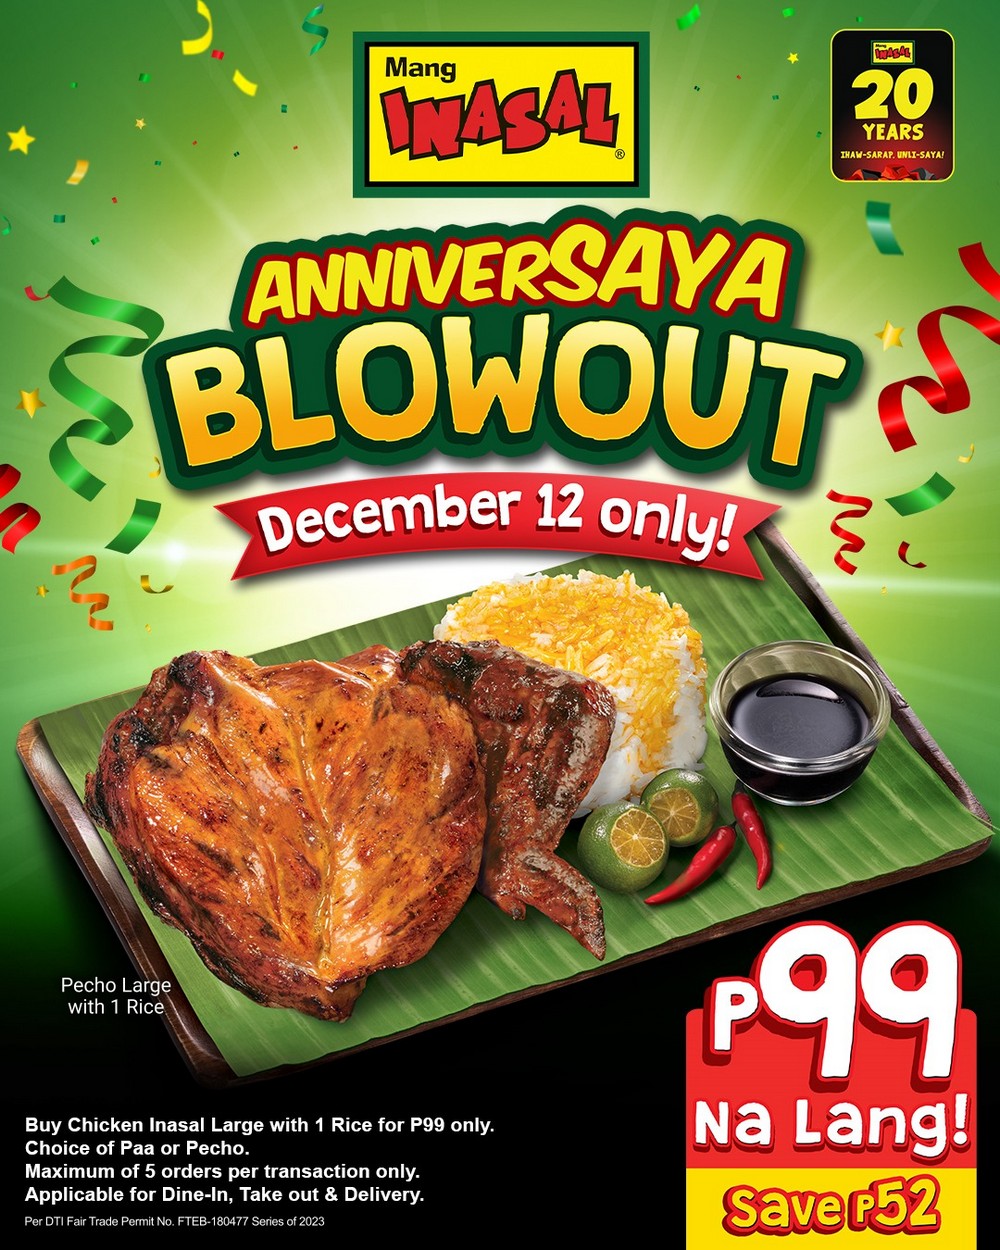 On December 12, Mang Inasal will treat all customers nationwide with the AnniverSAYA Blowout